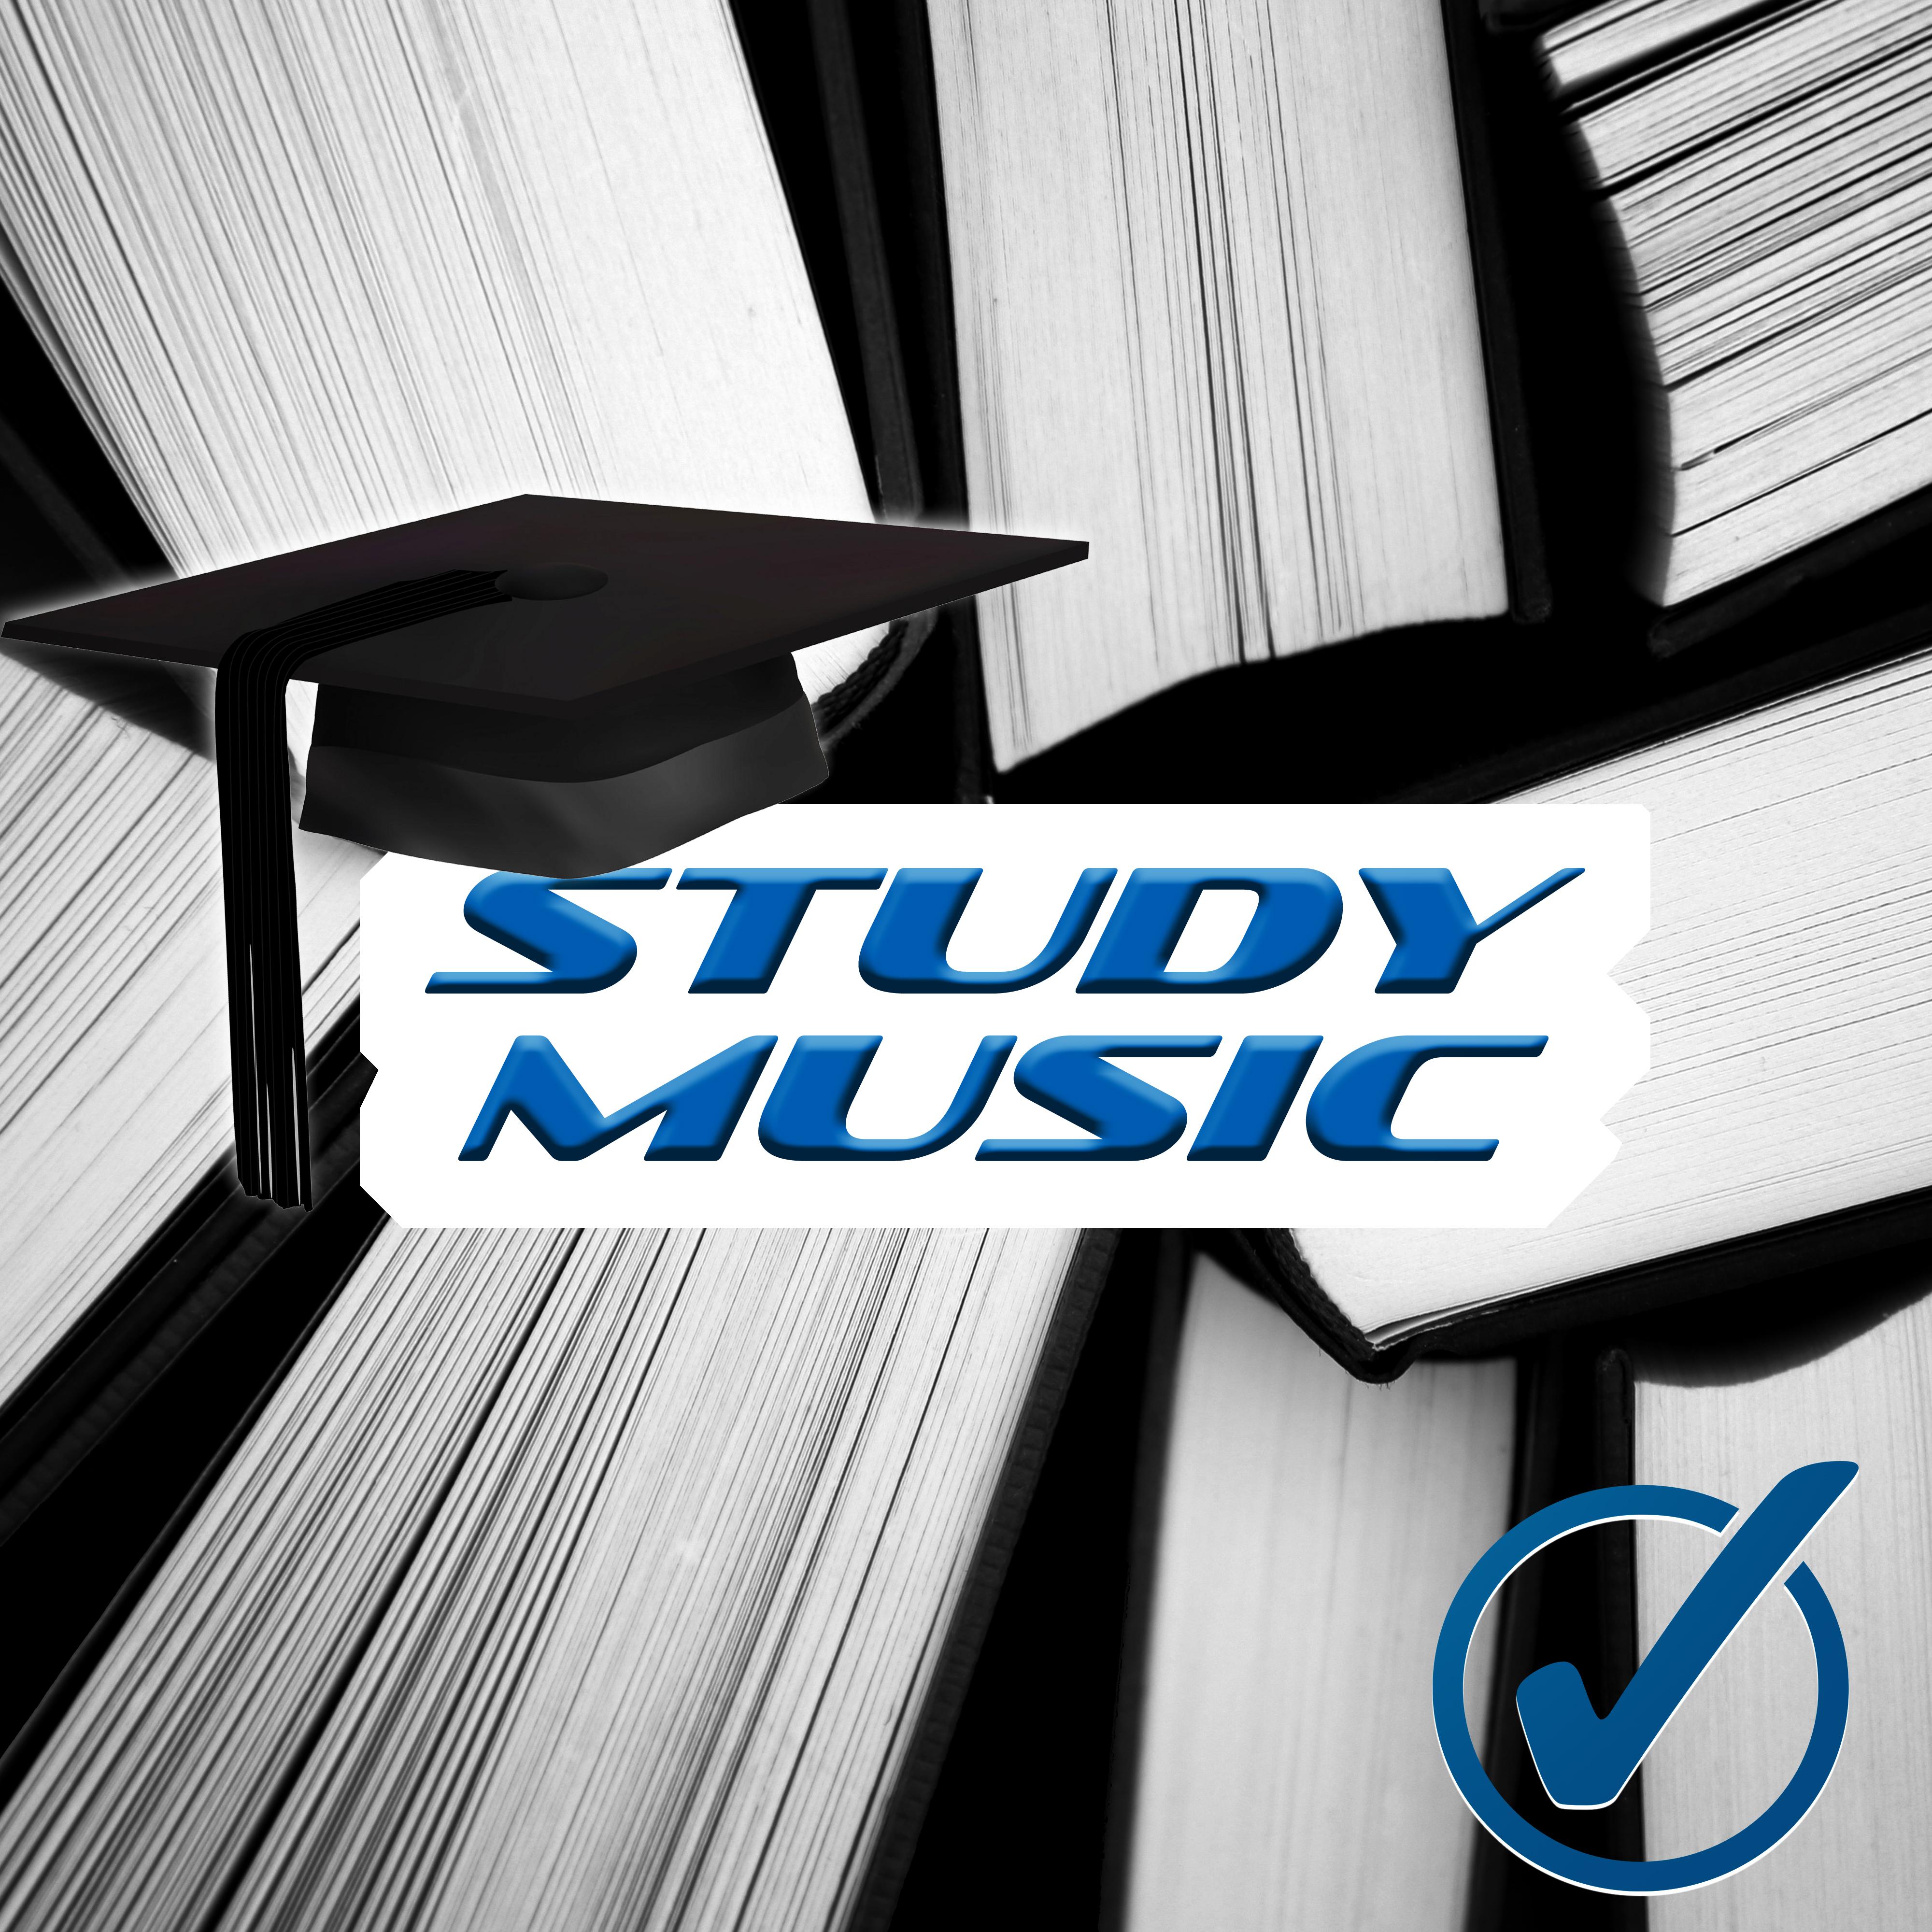 Ambient Study Music – Calm Background Music to Improve Concentration & Memory, Do Homework, Nature Sounds for Brain Power, Active Listening, Relax and Study Easily